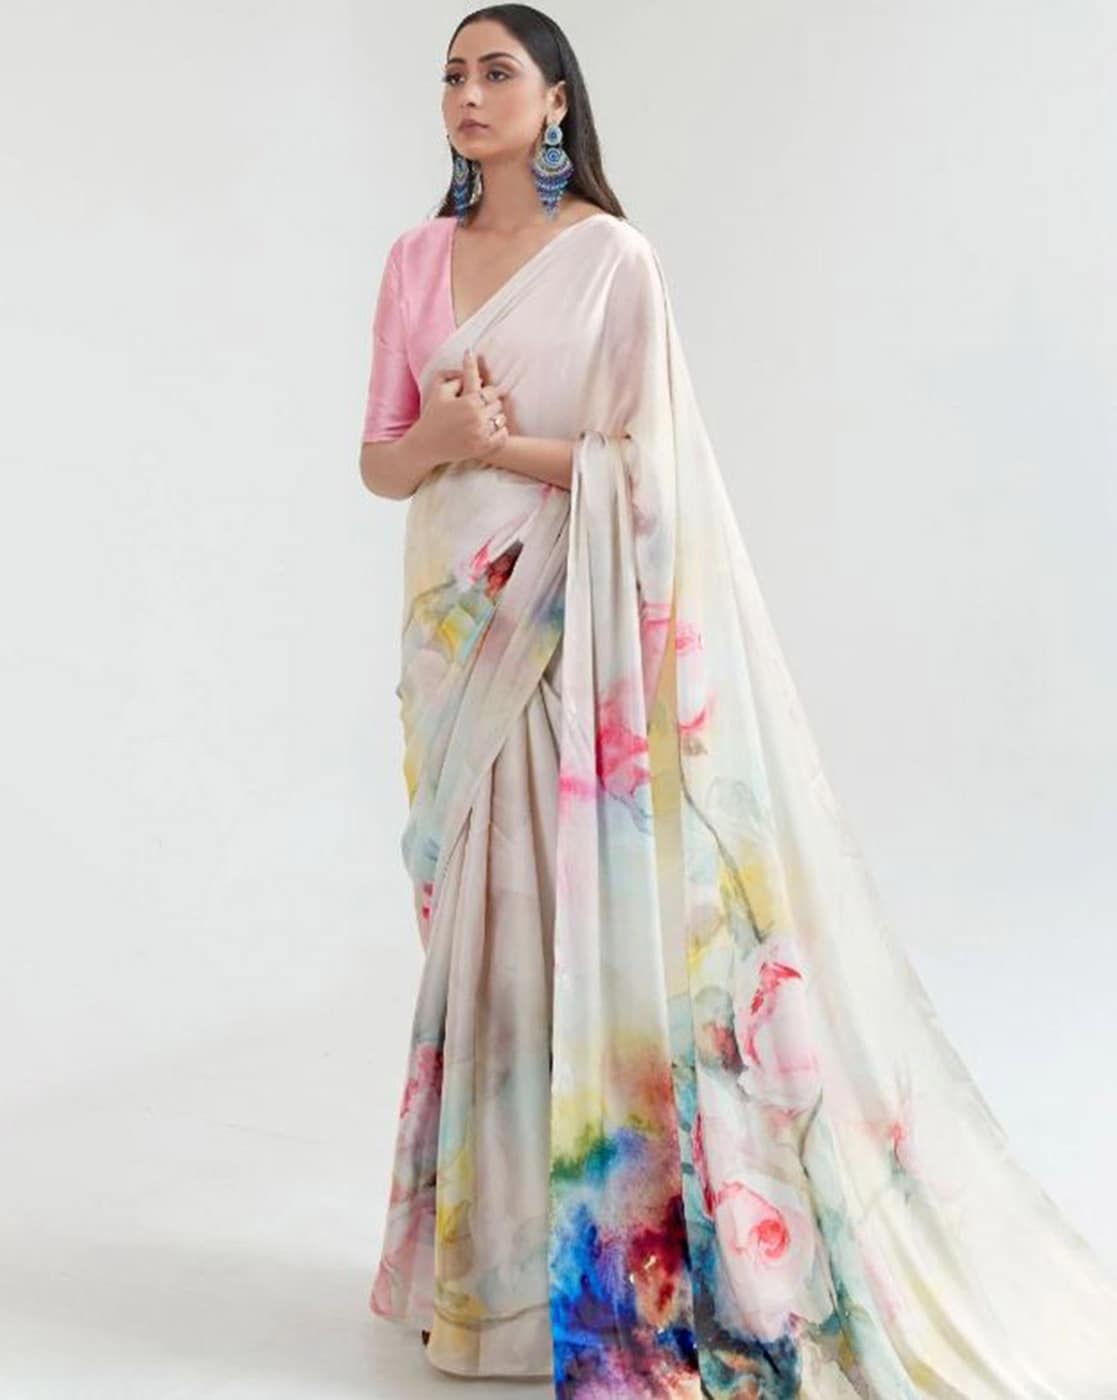 7 SAREE TRENDS TO FOLLOW IN 2023 – KYETH